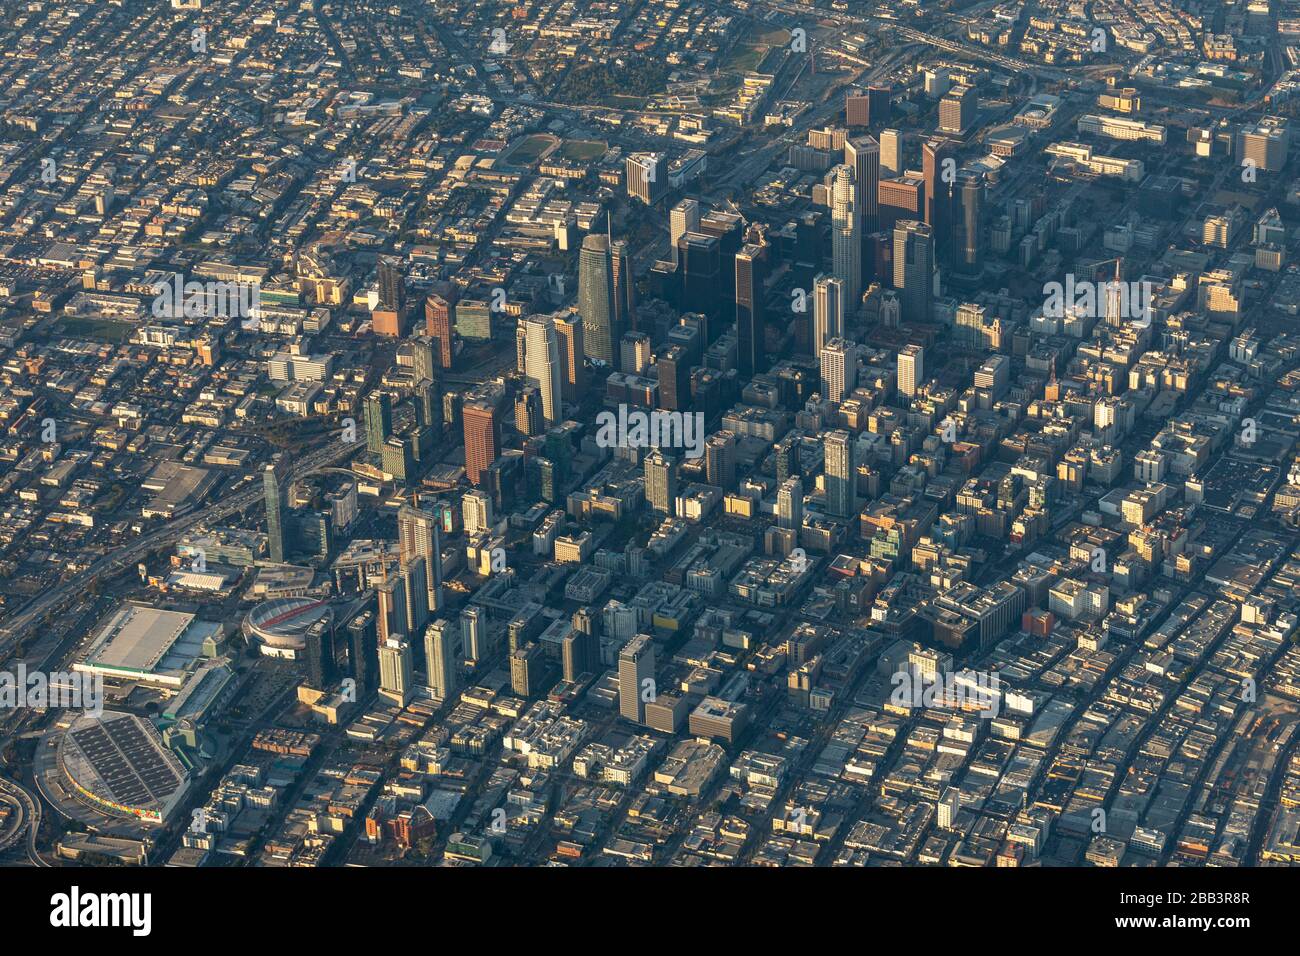 General overall aerial view of downtown Los Angeles during a flight around Southern California on Saturday, October 5, 2019, in Los Angeles, California, USA. (Photo by IOS/Espa-Images) Stock Photo